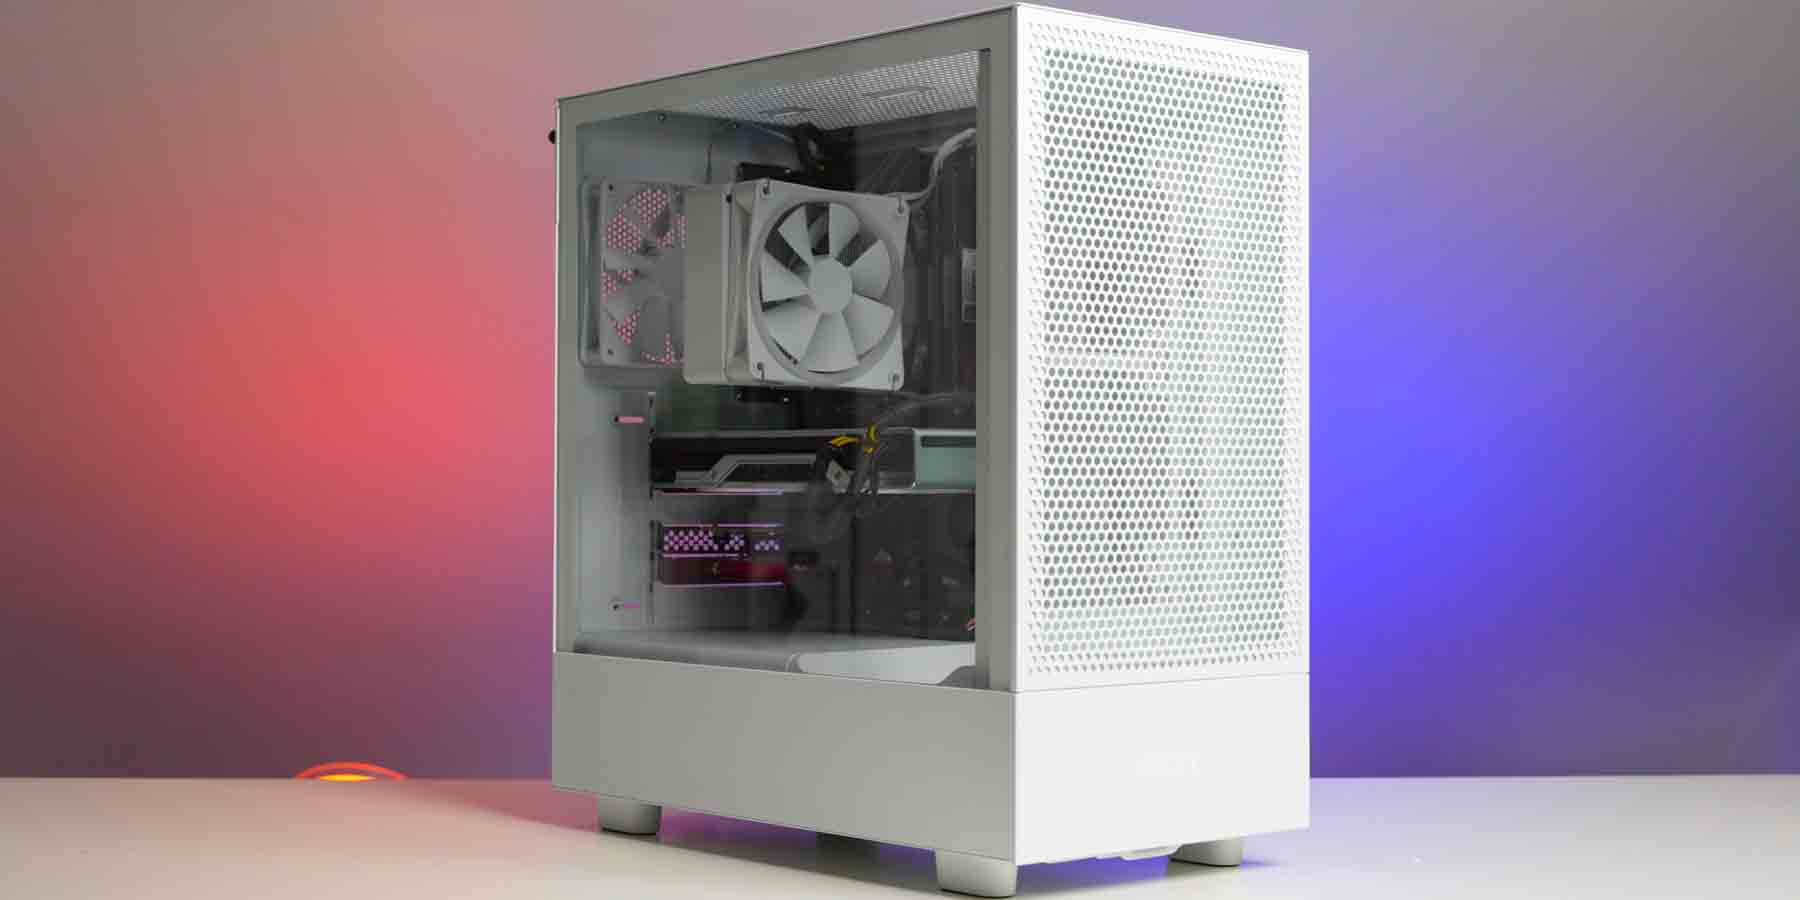 NZXT H5 Flow case review: A step in the right